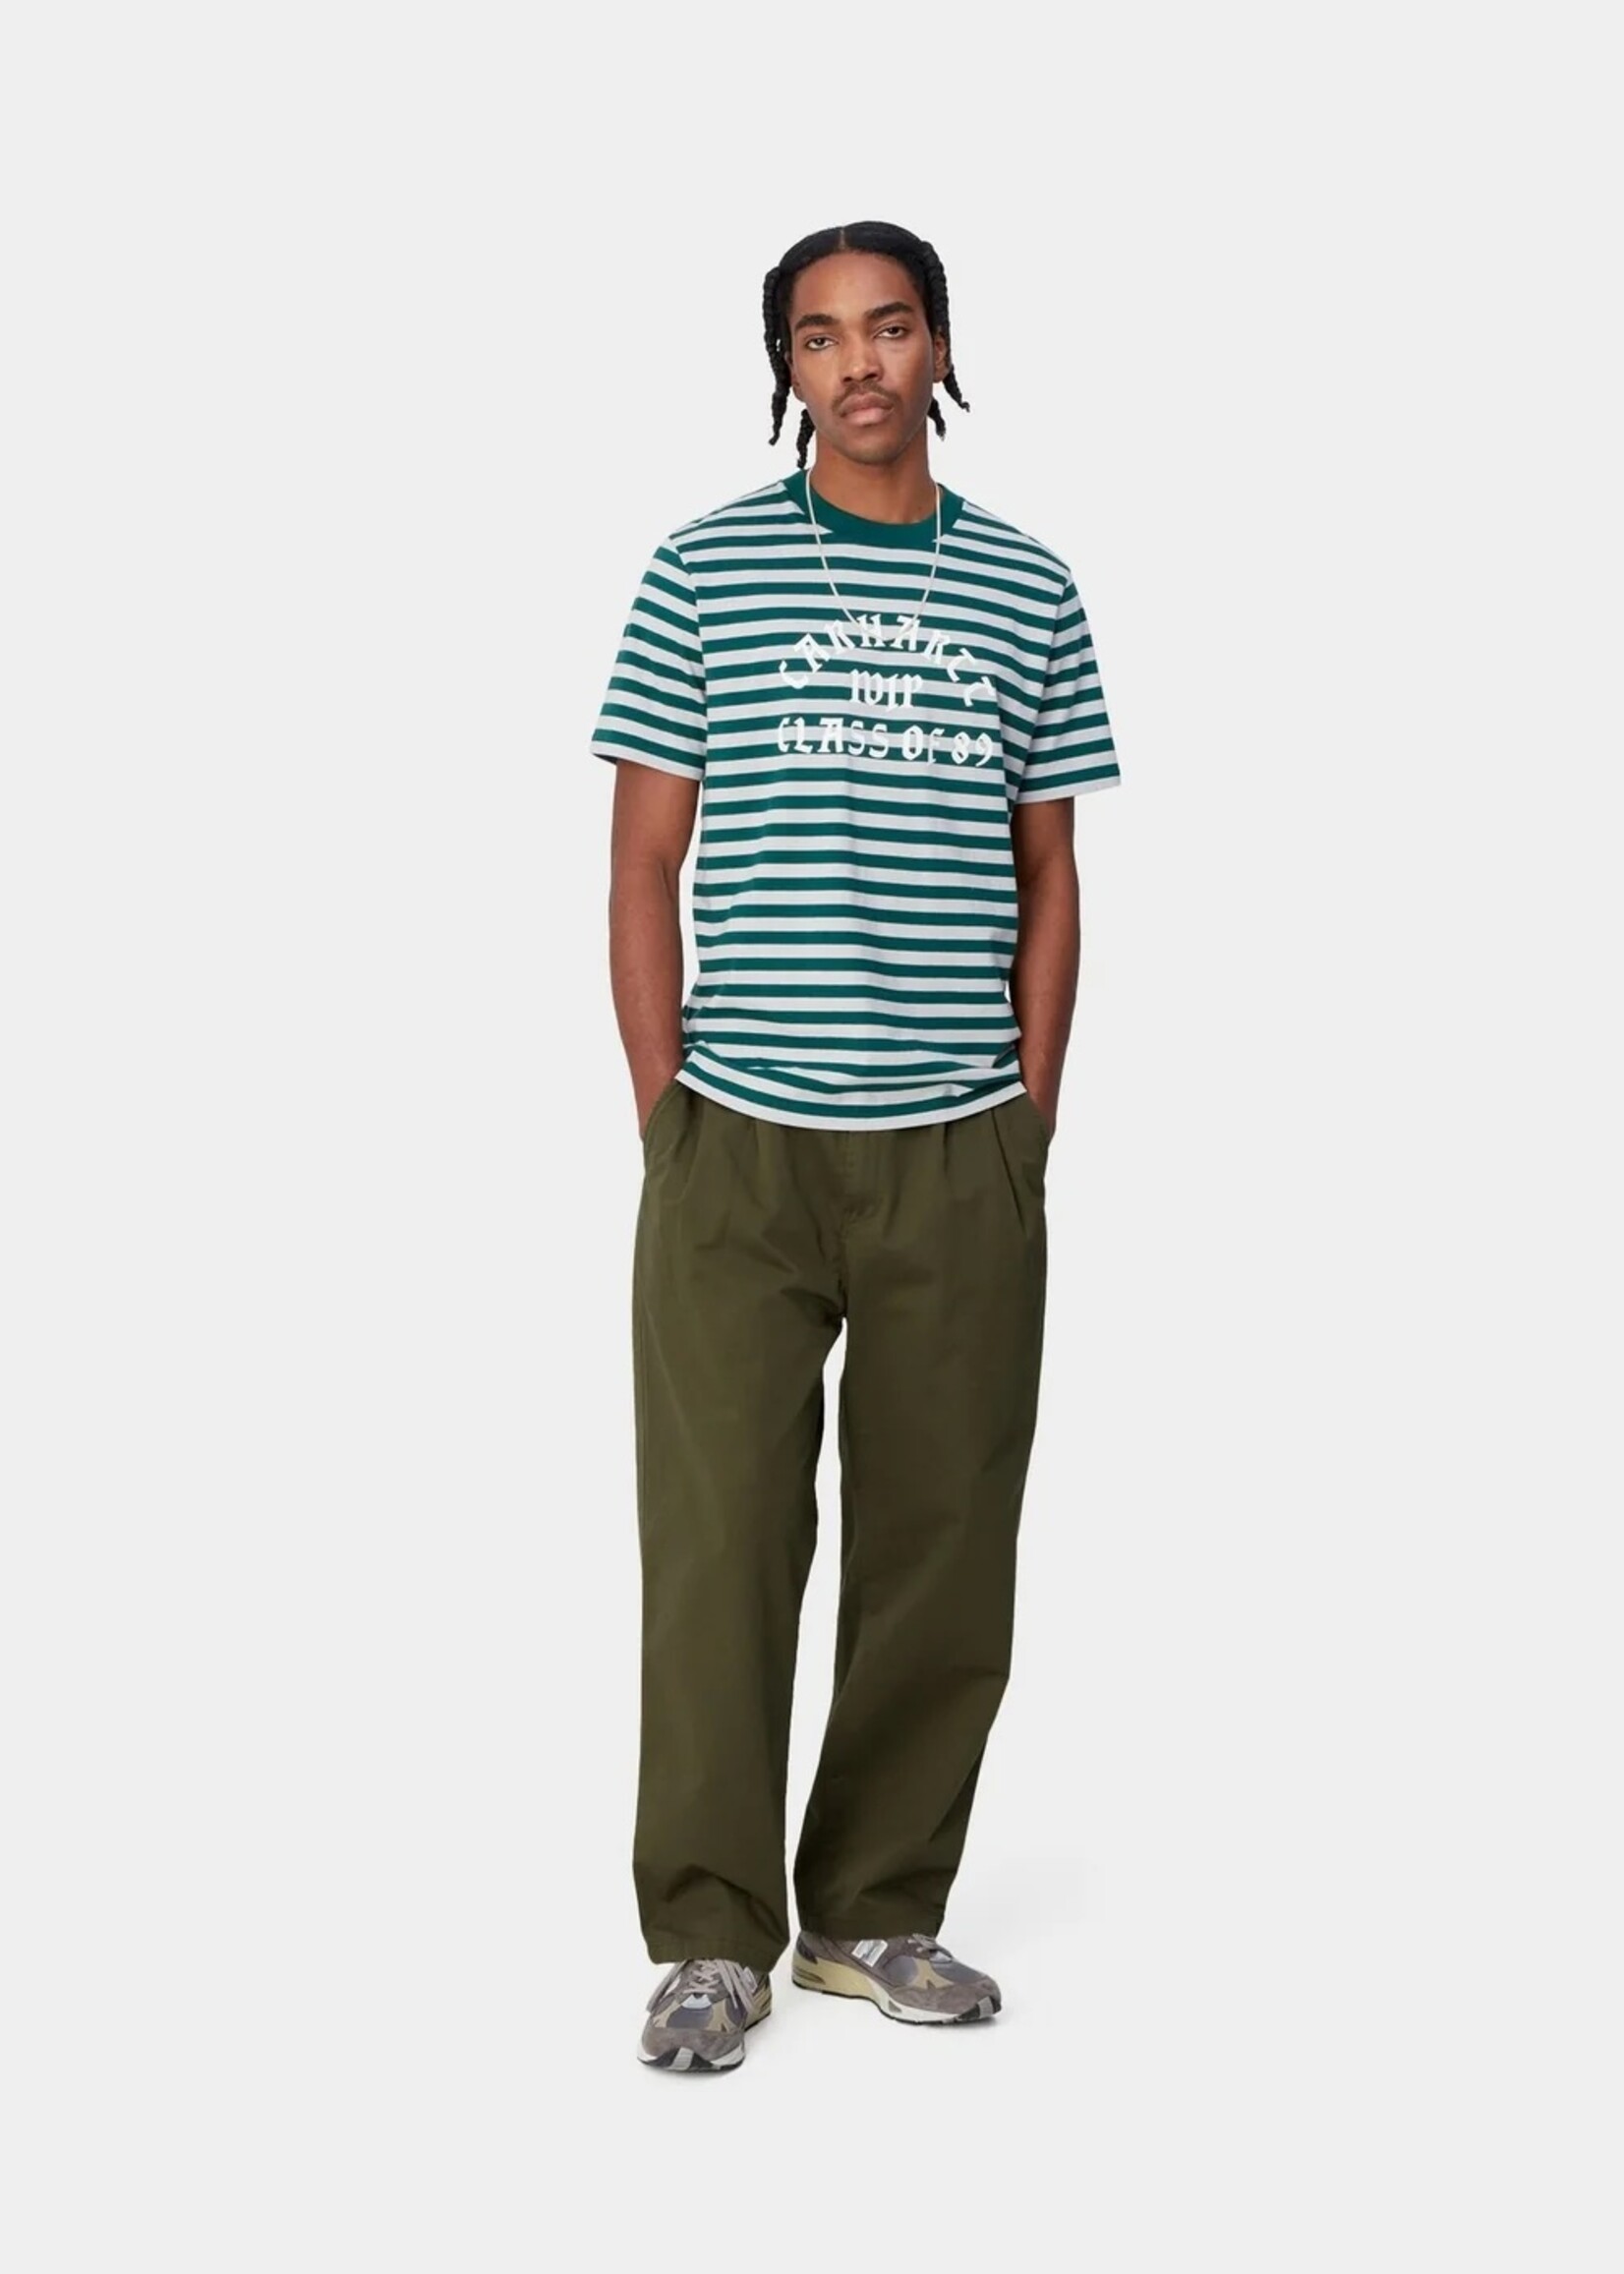 Carhartt Work In Progress Marv Pleated Pant in Dundee